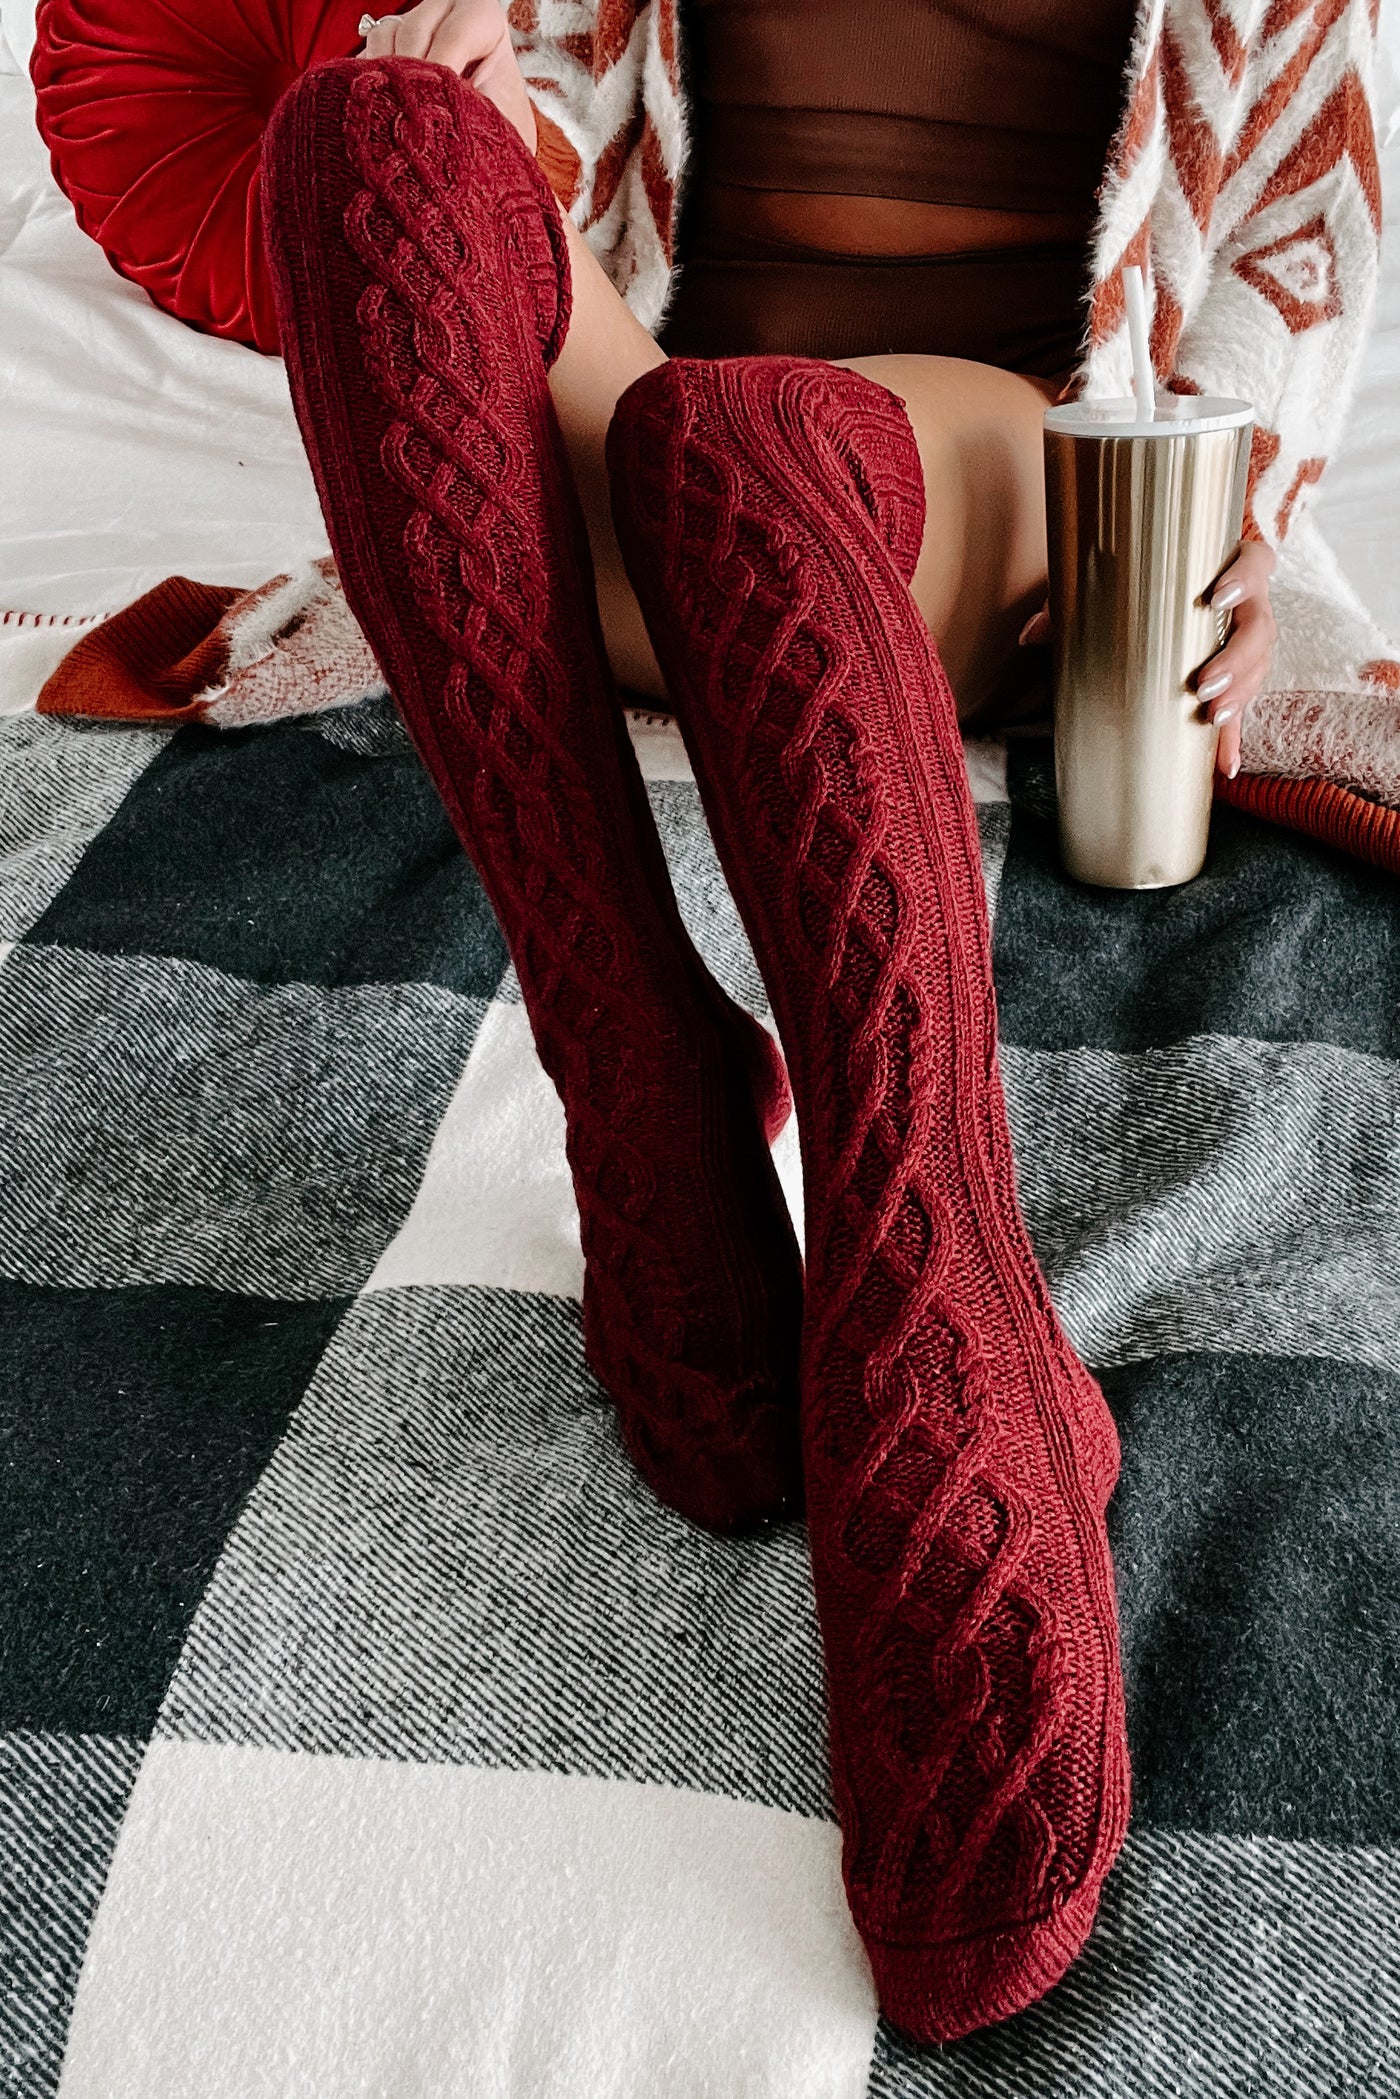 Toasty Toes Knee-High Cable Knit Socks (Burgundy)